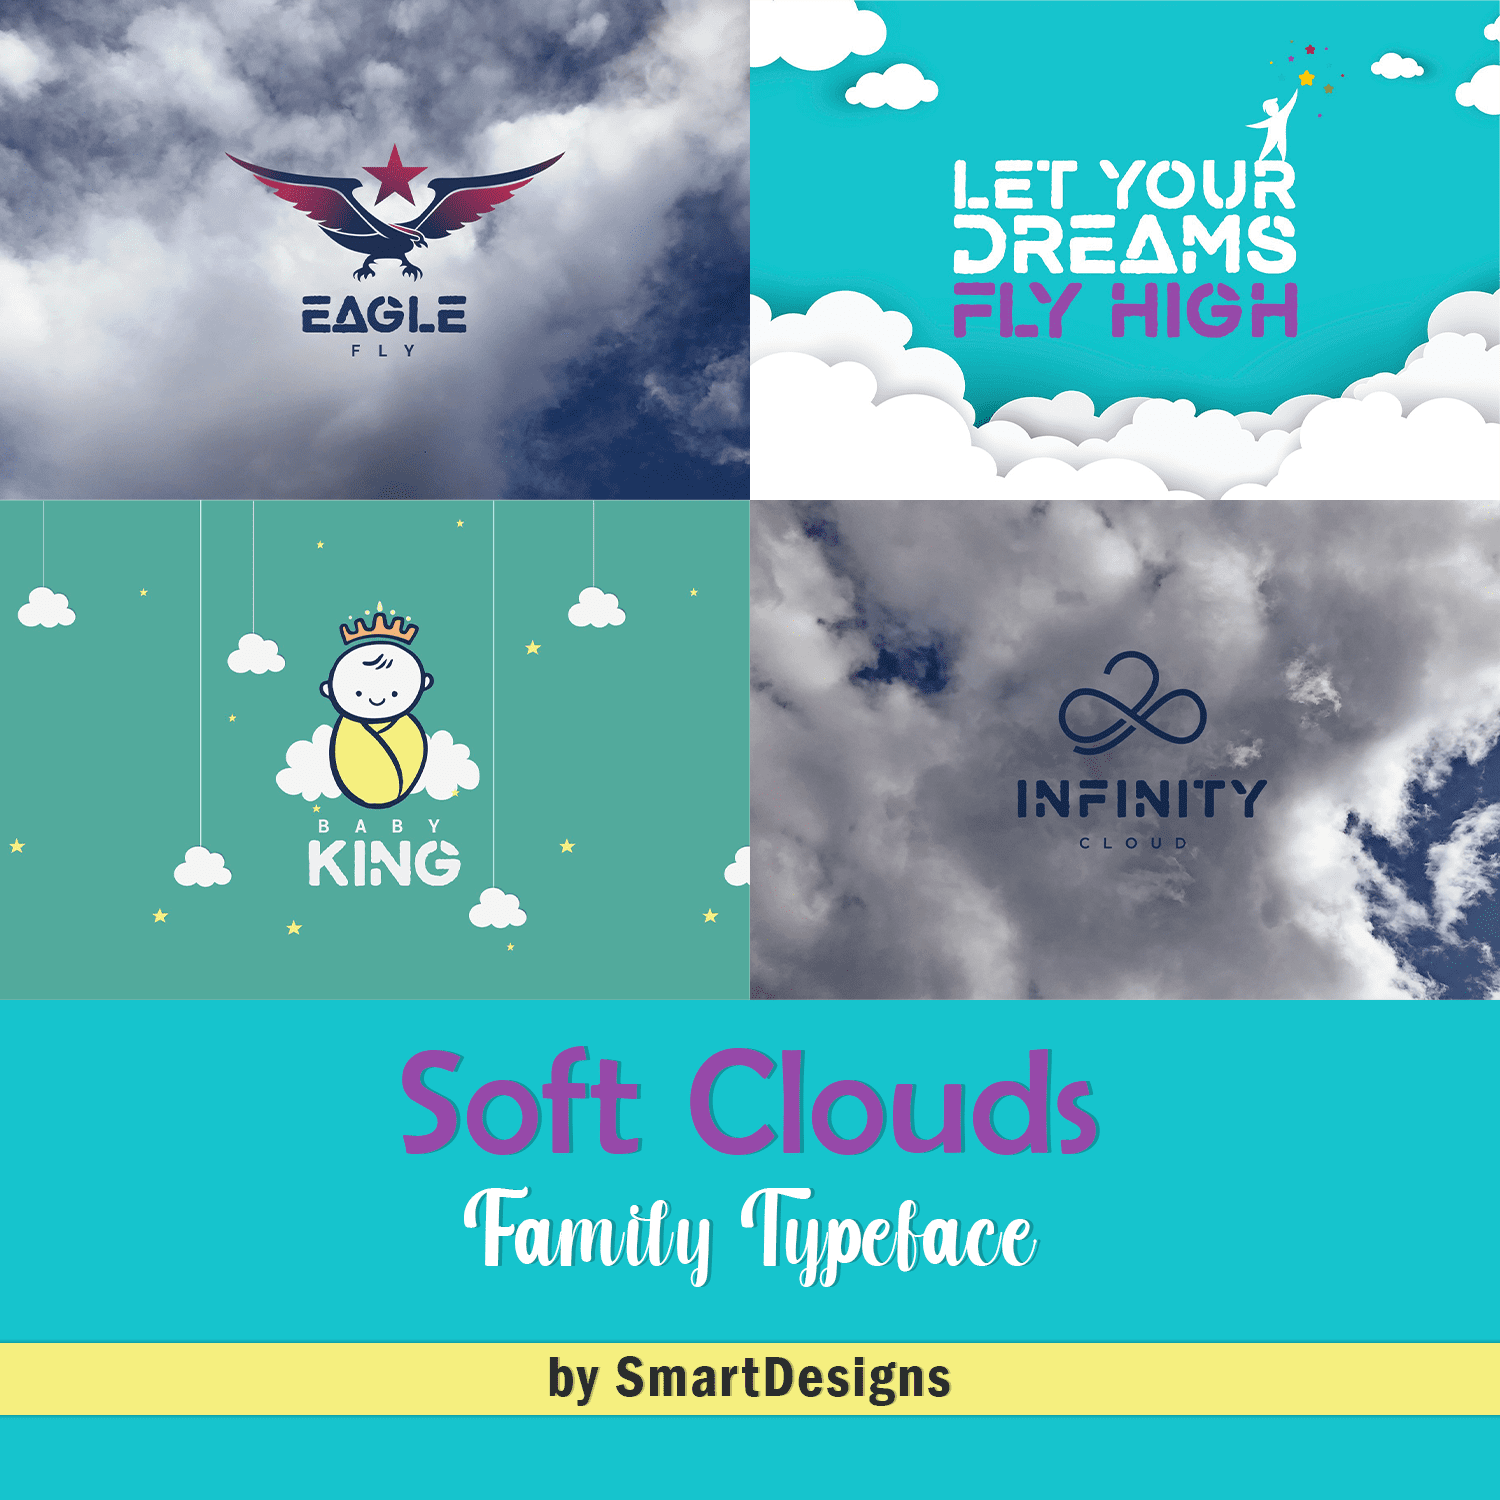 Preview soft clouds family typeface.